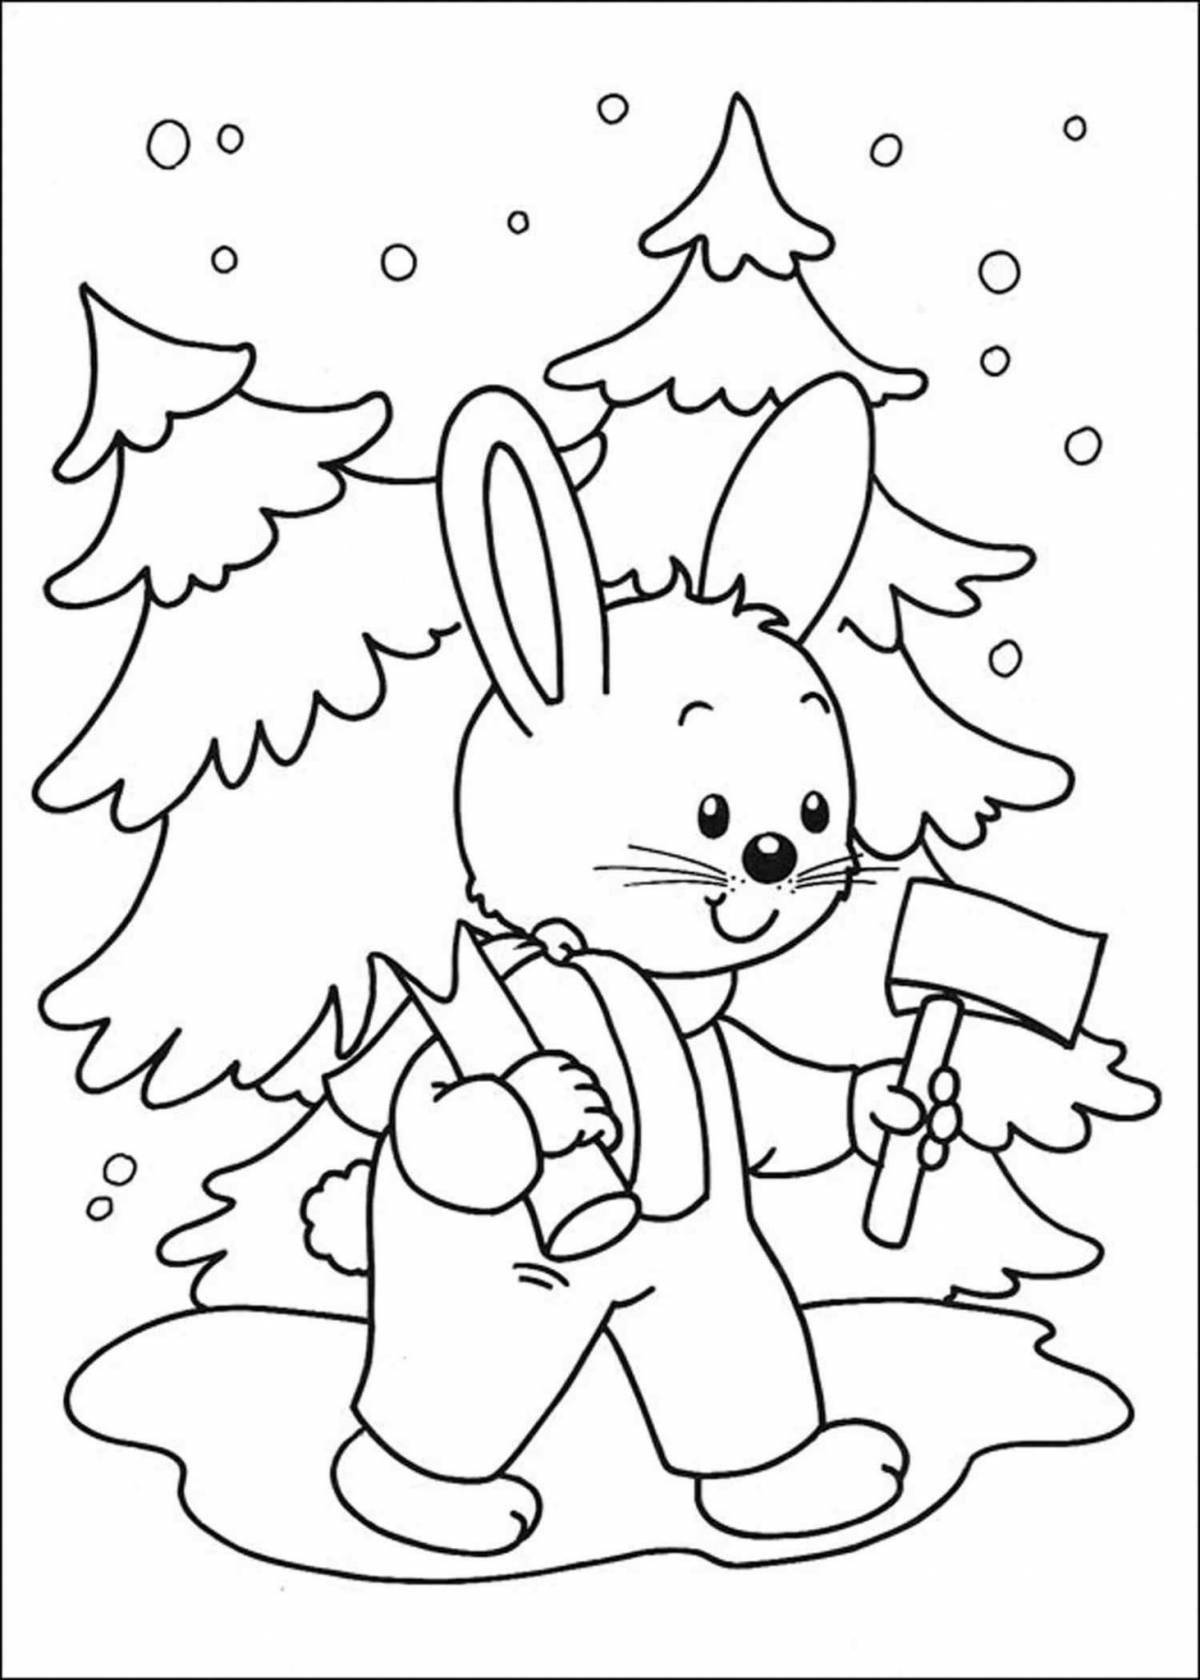 Coloring radiant bunny new year